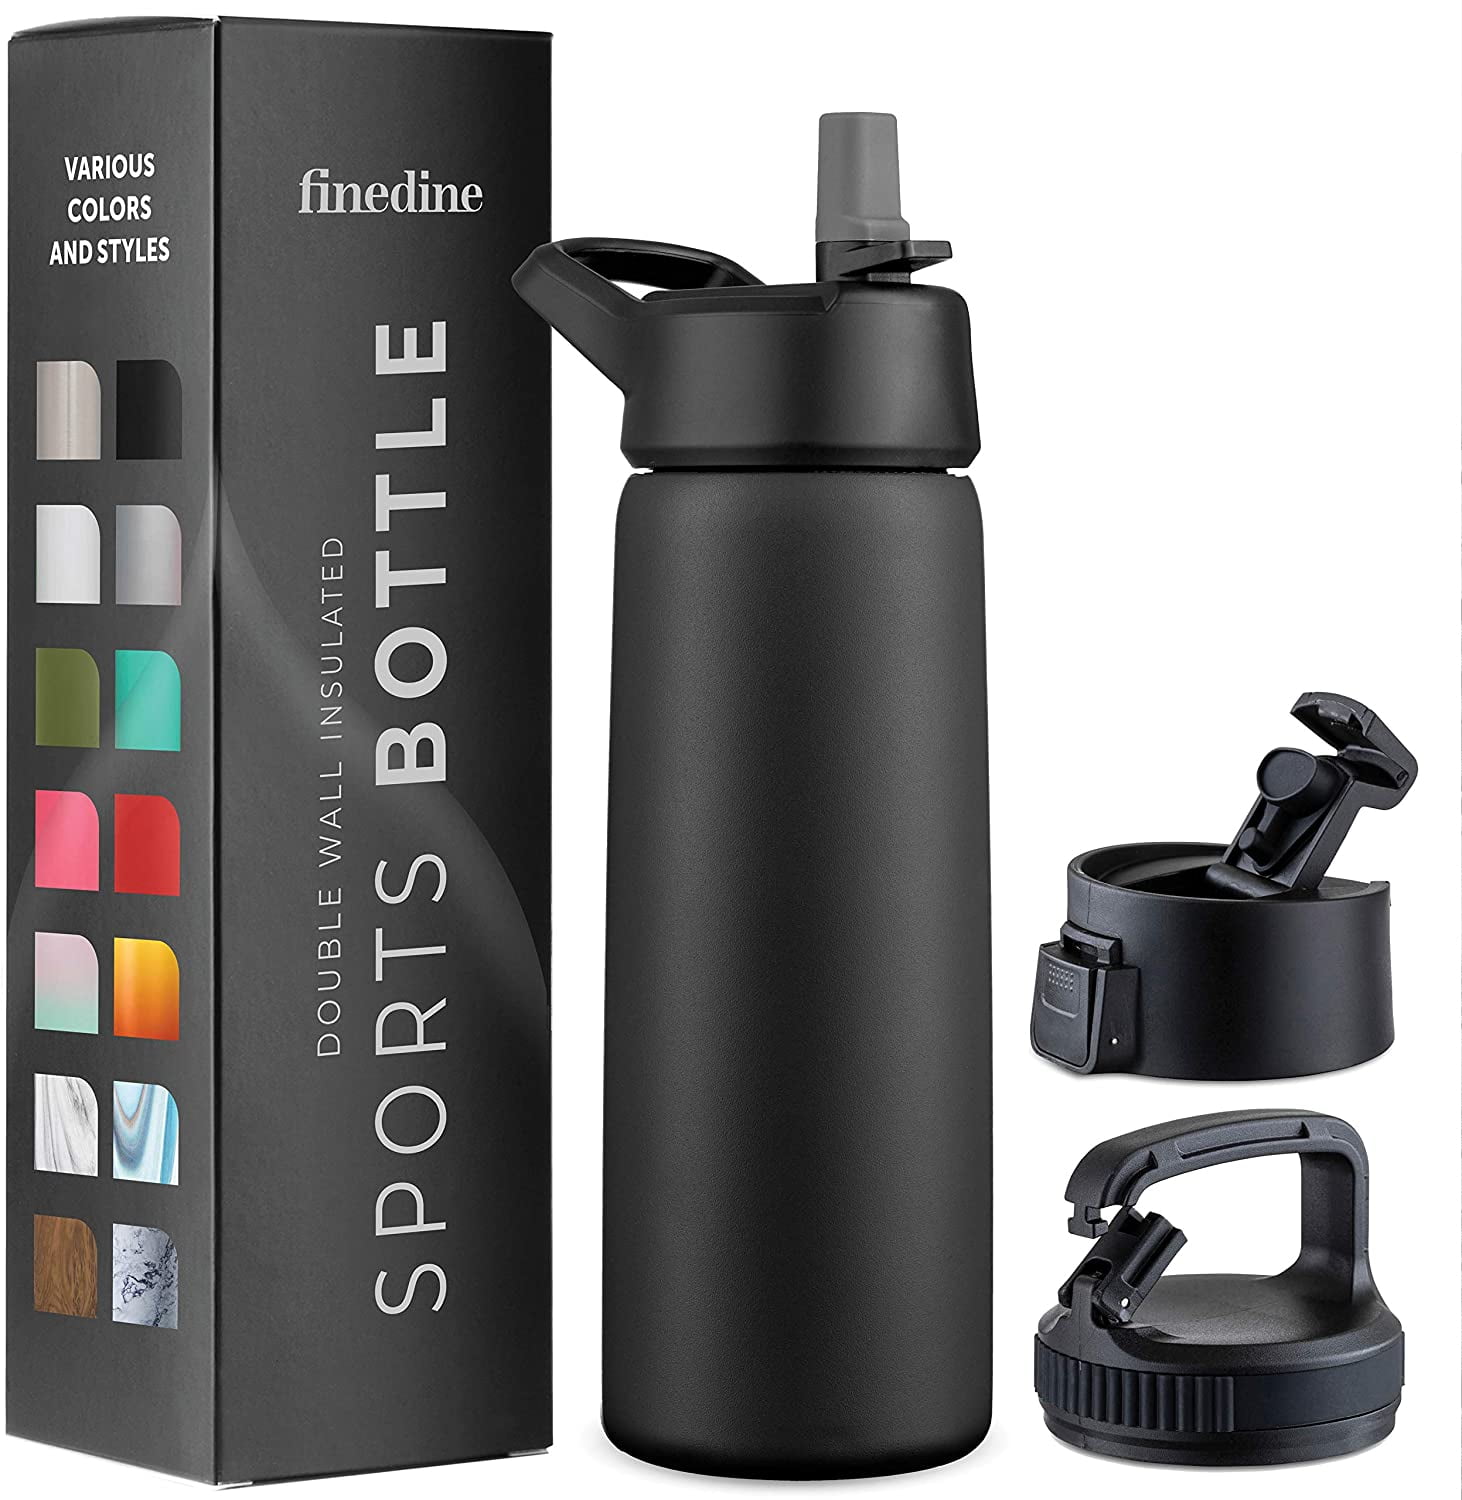 Insulated Water Bottle with Straw Black 32 oz Water Bottles Reusable Water Bottle by Albor Triple Insulated Stainless Steel Water Bottles with 4 Leak-Proof Lids and 2 Straws 